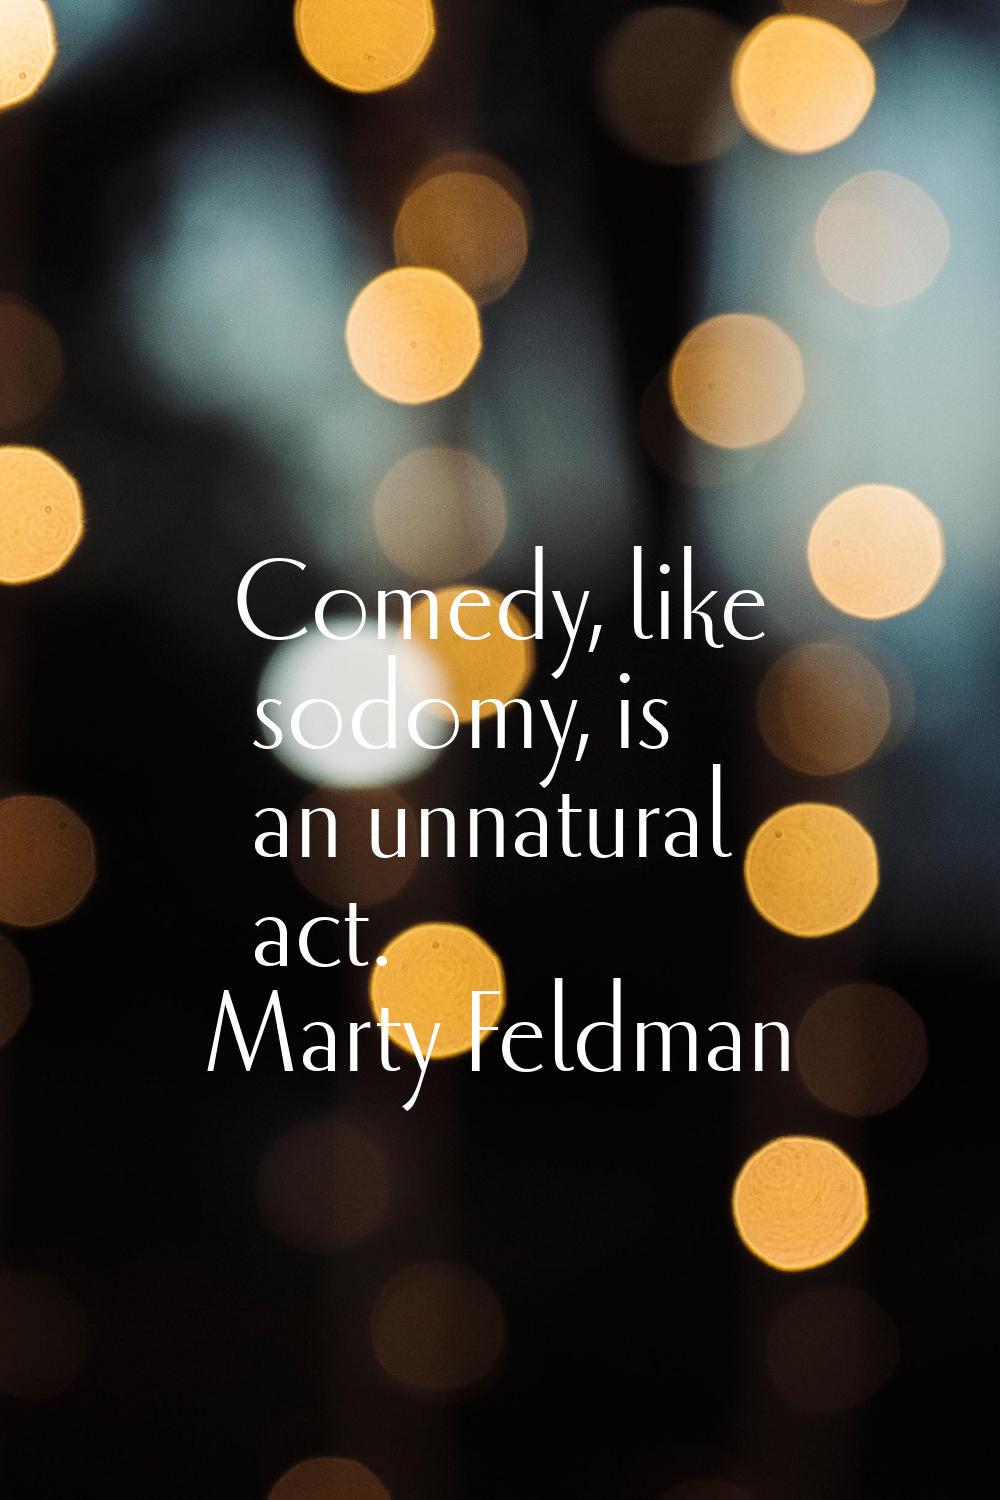 Comedy, like sodomy, is an unnatural act.